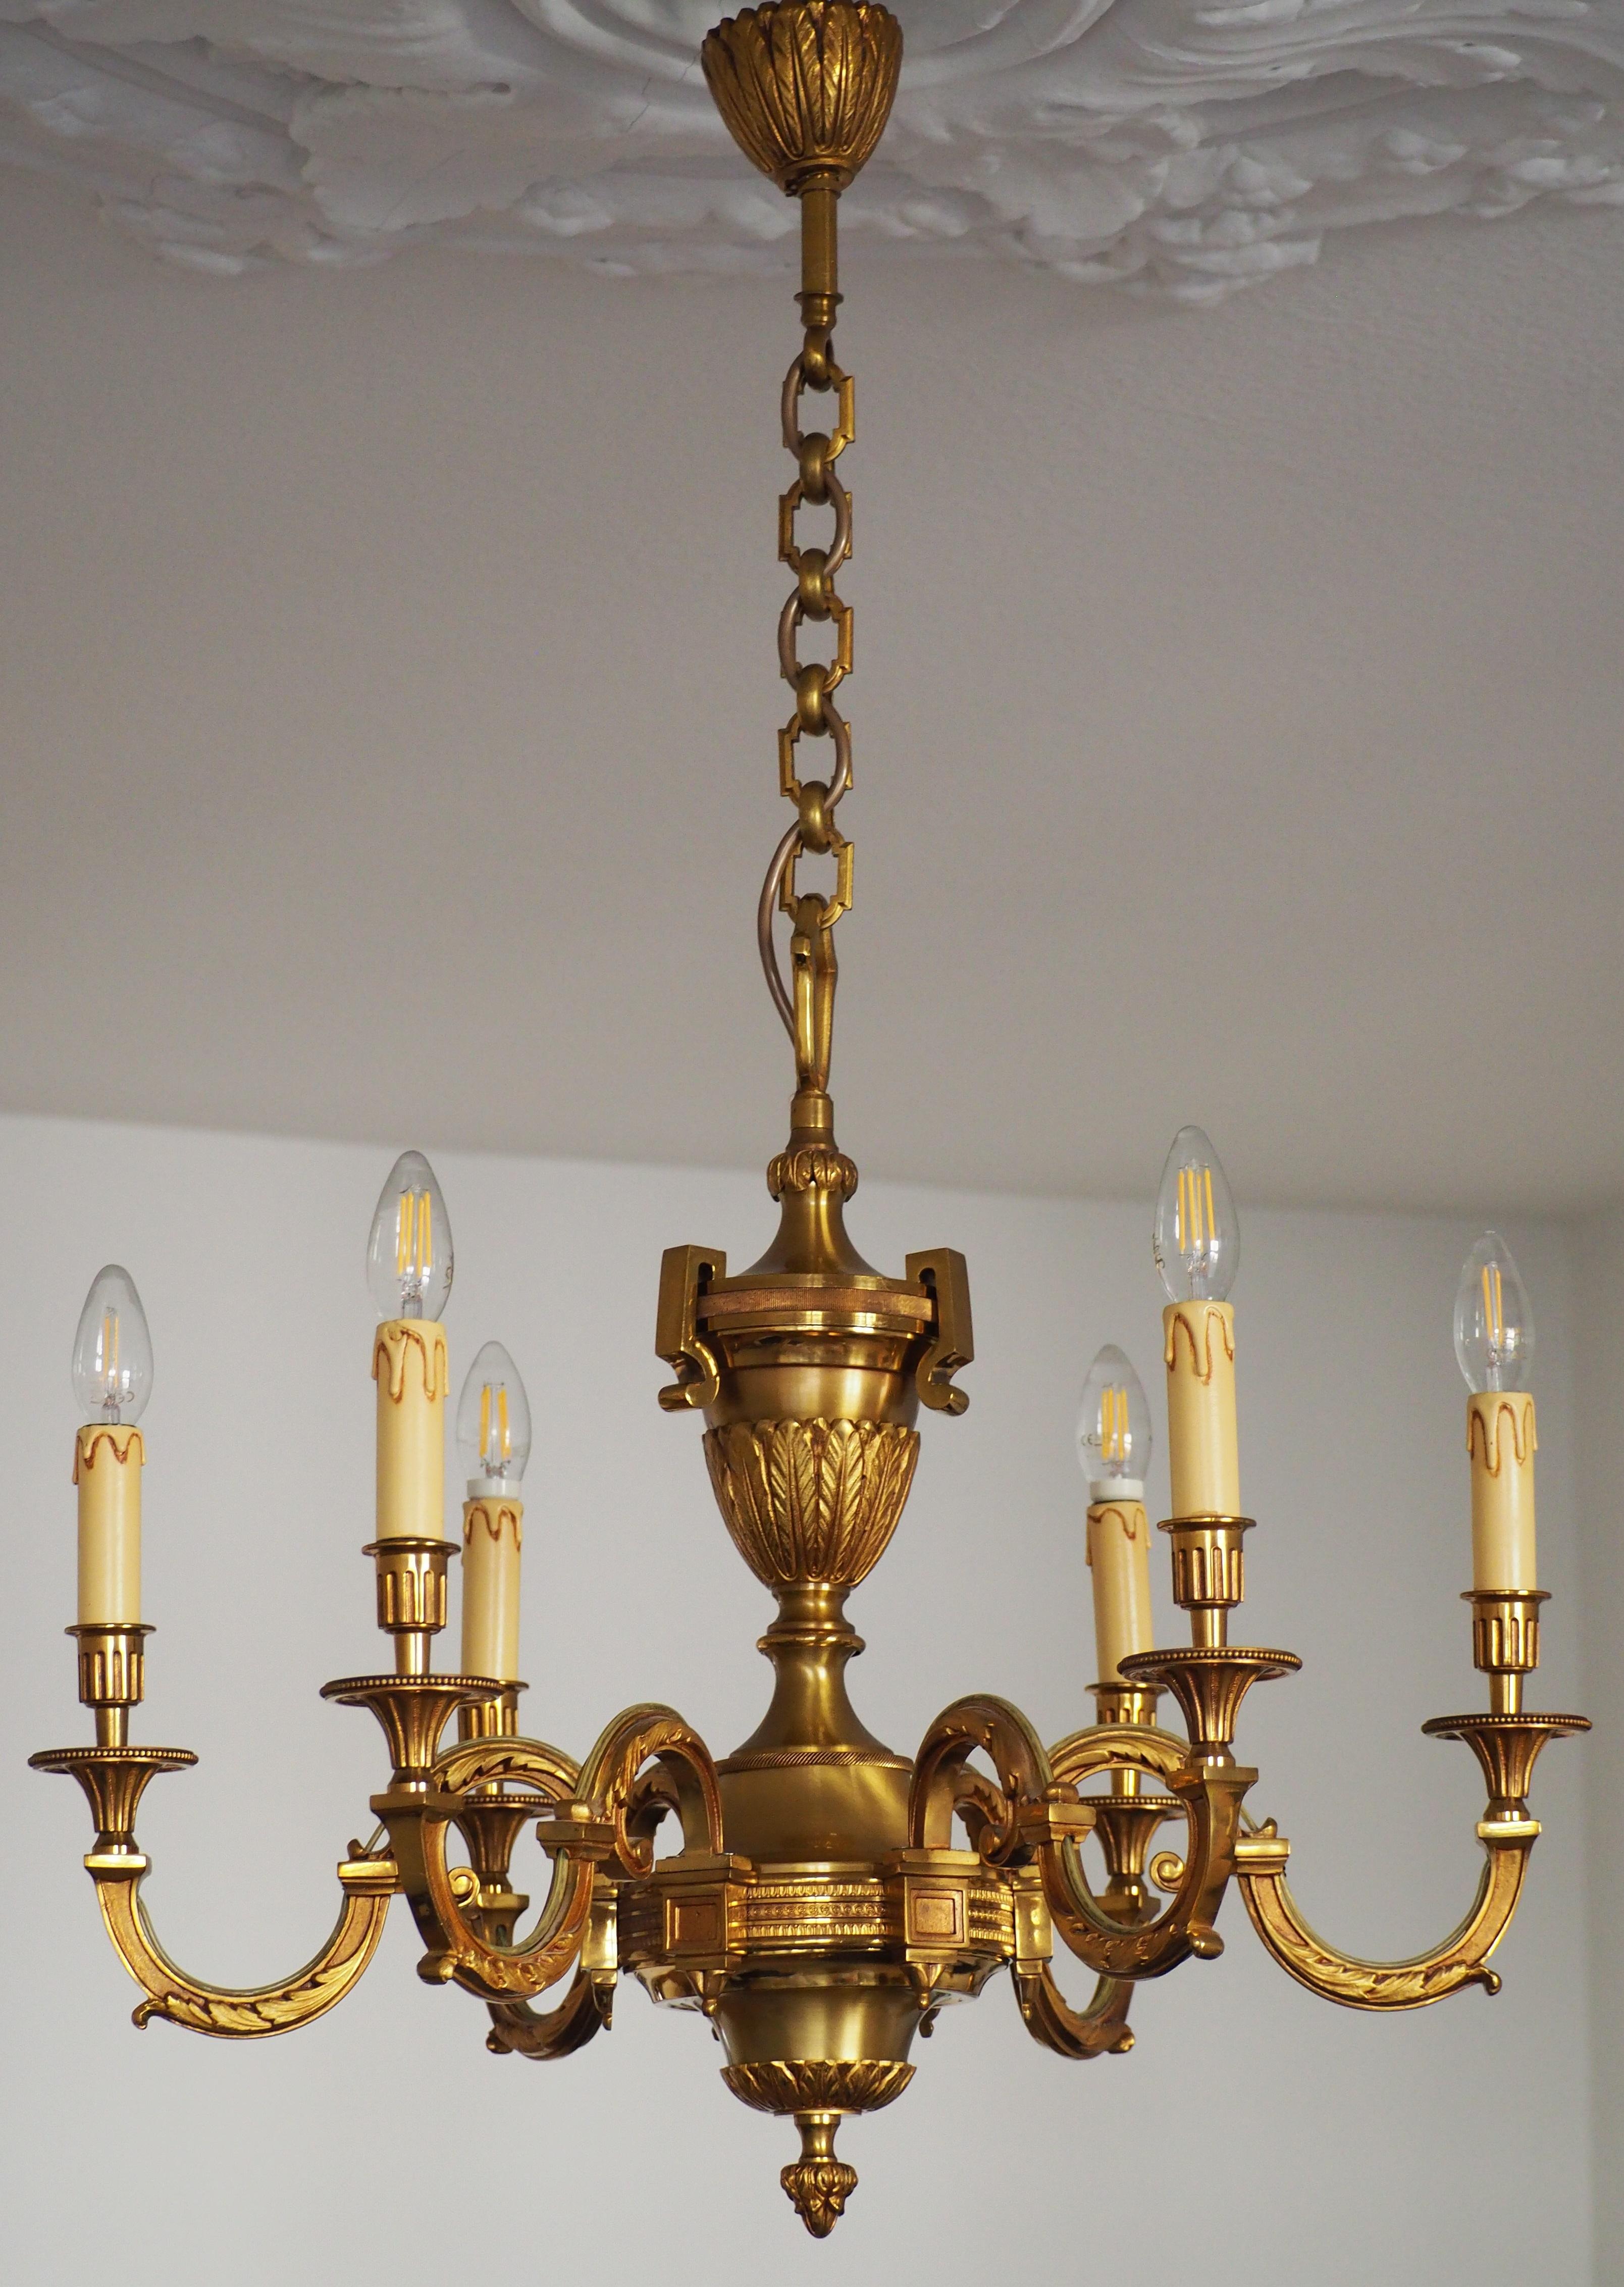 A beautiful solid bronze chandelier made by LG Paris (Maison Lucien Gau), Paris, France.
The chandelier has six scroll arms and displays great elegance, thanks to a platinum coating old gold. This chandelier is inspired by the mid-18th century and